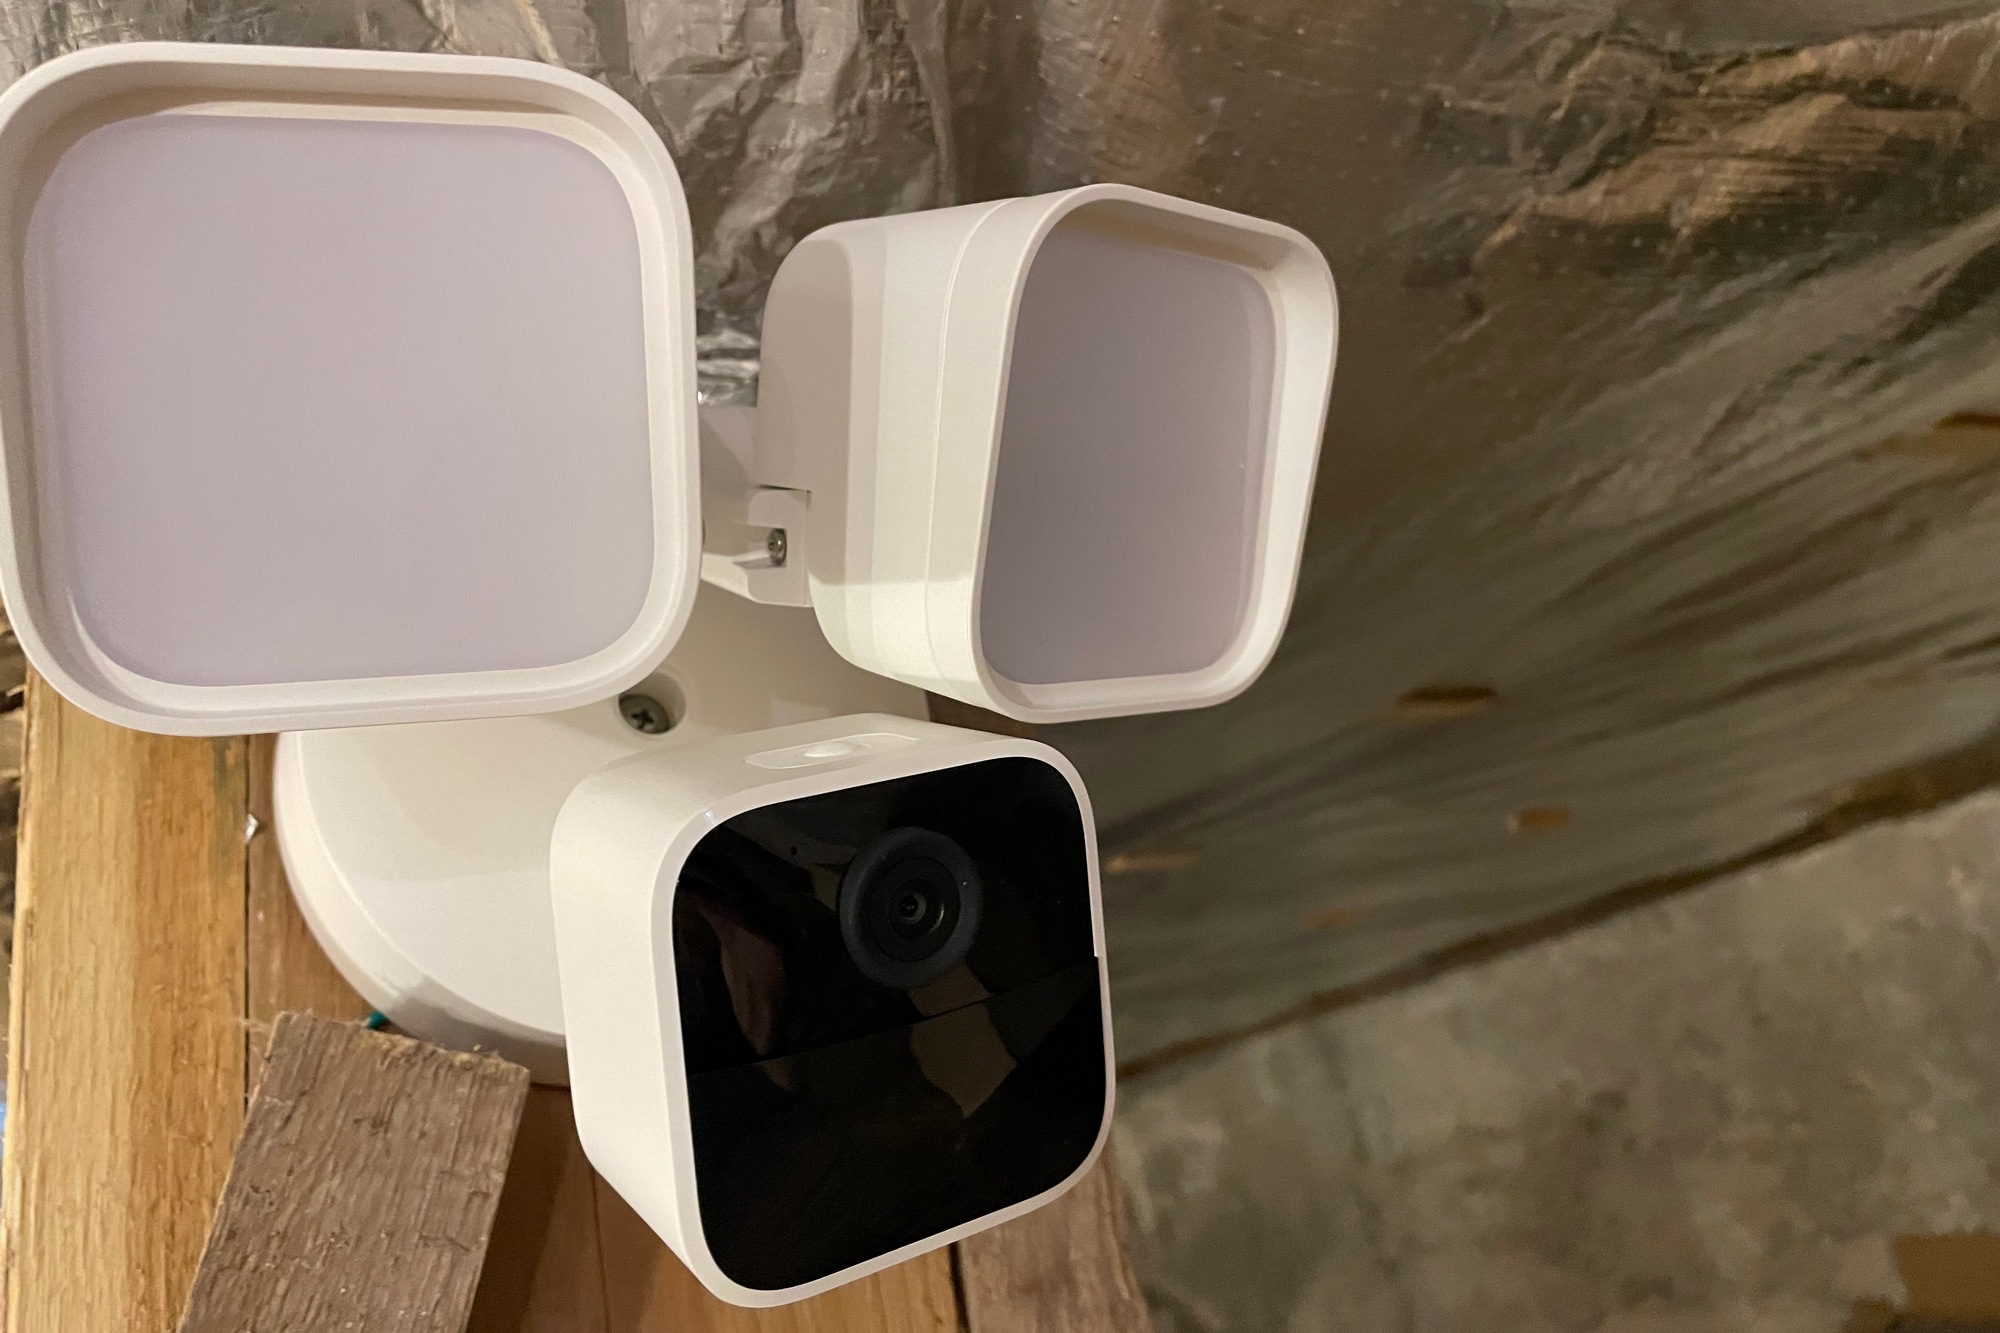 Blink Wired Floodlight Camera -- Best budget-priced security camera/floodlight combo